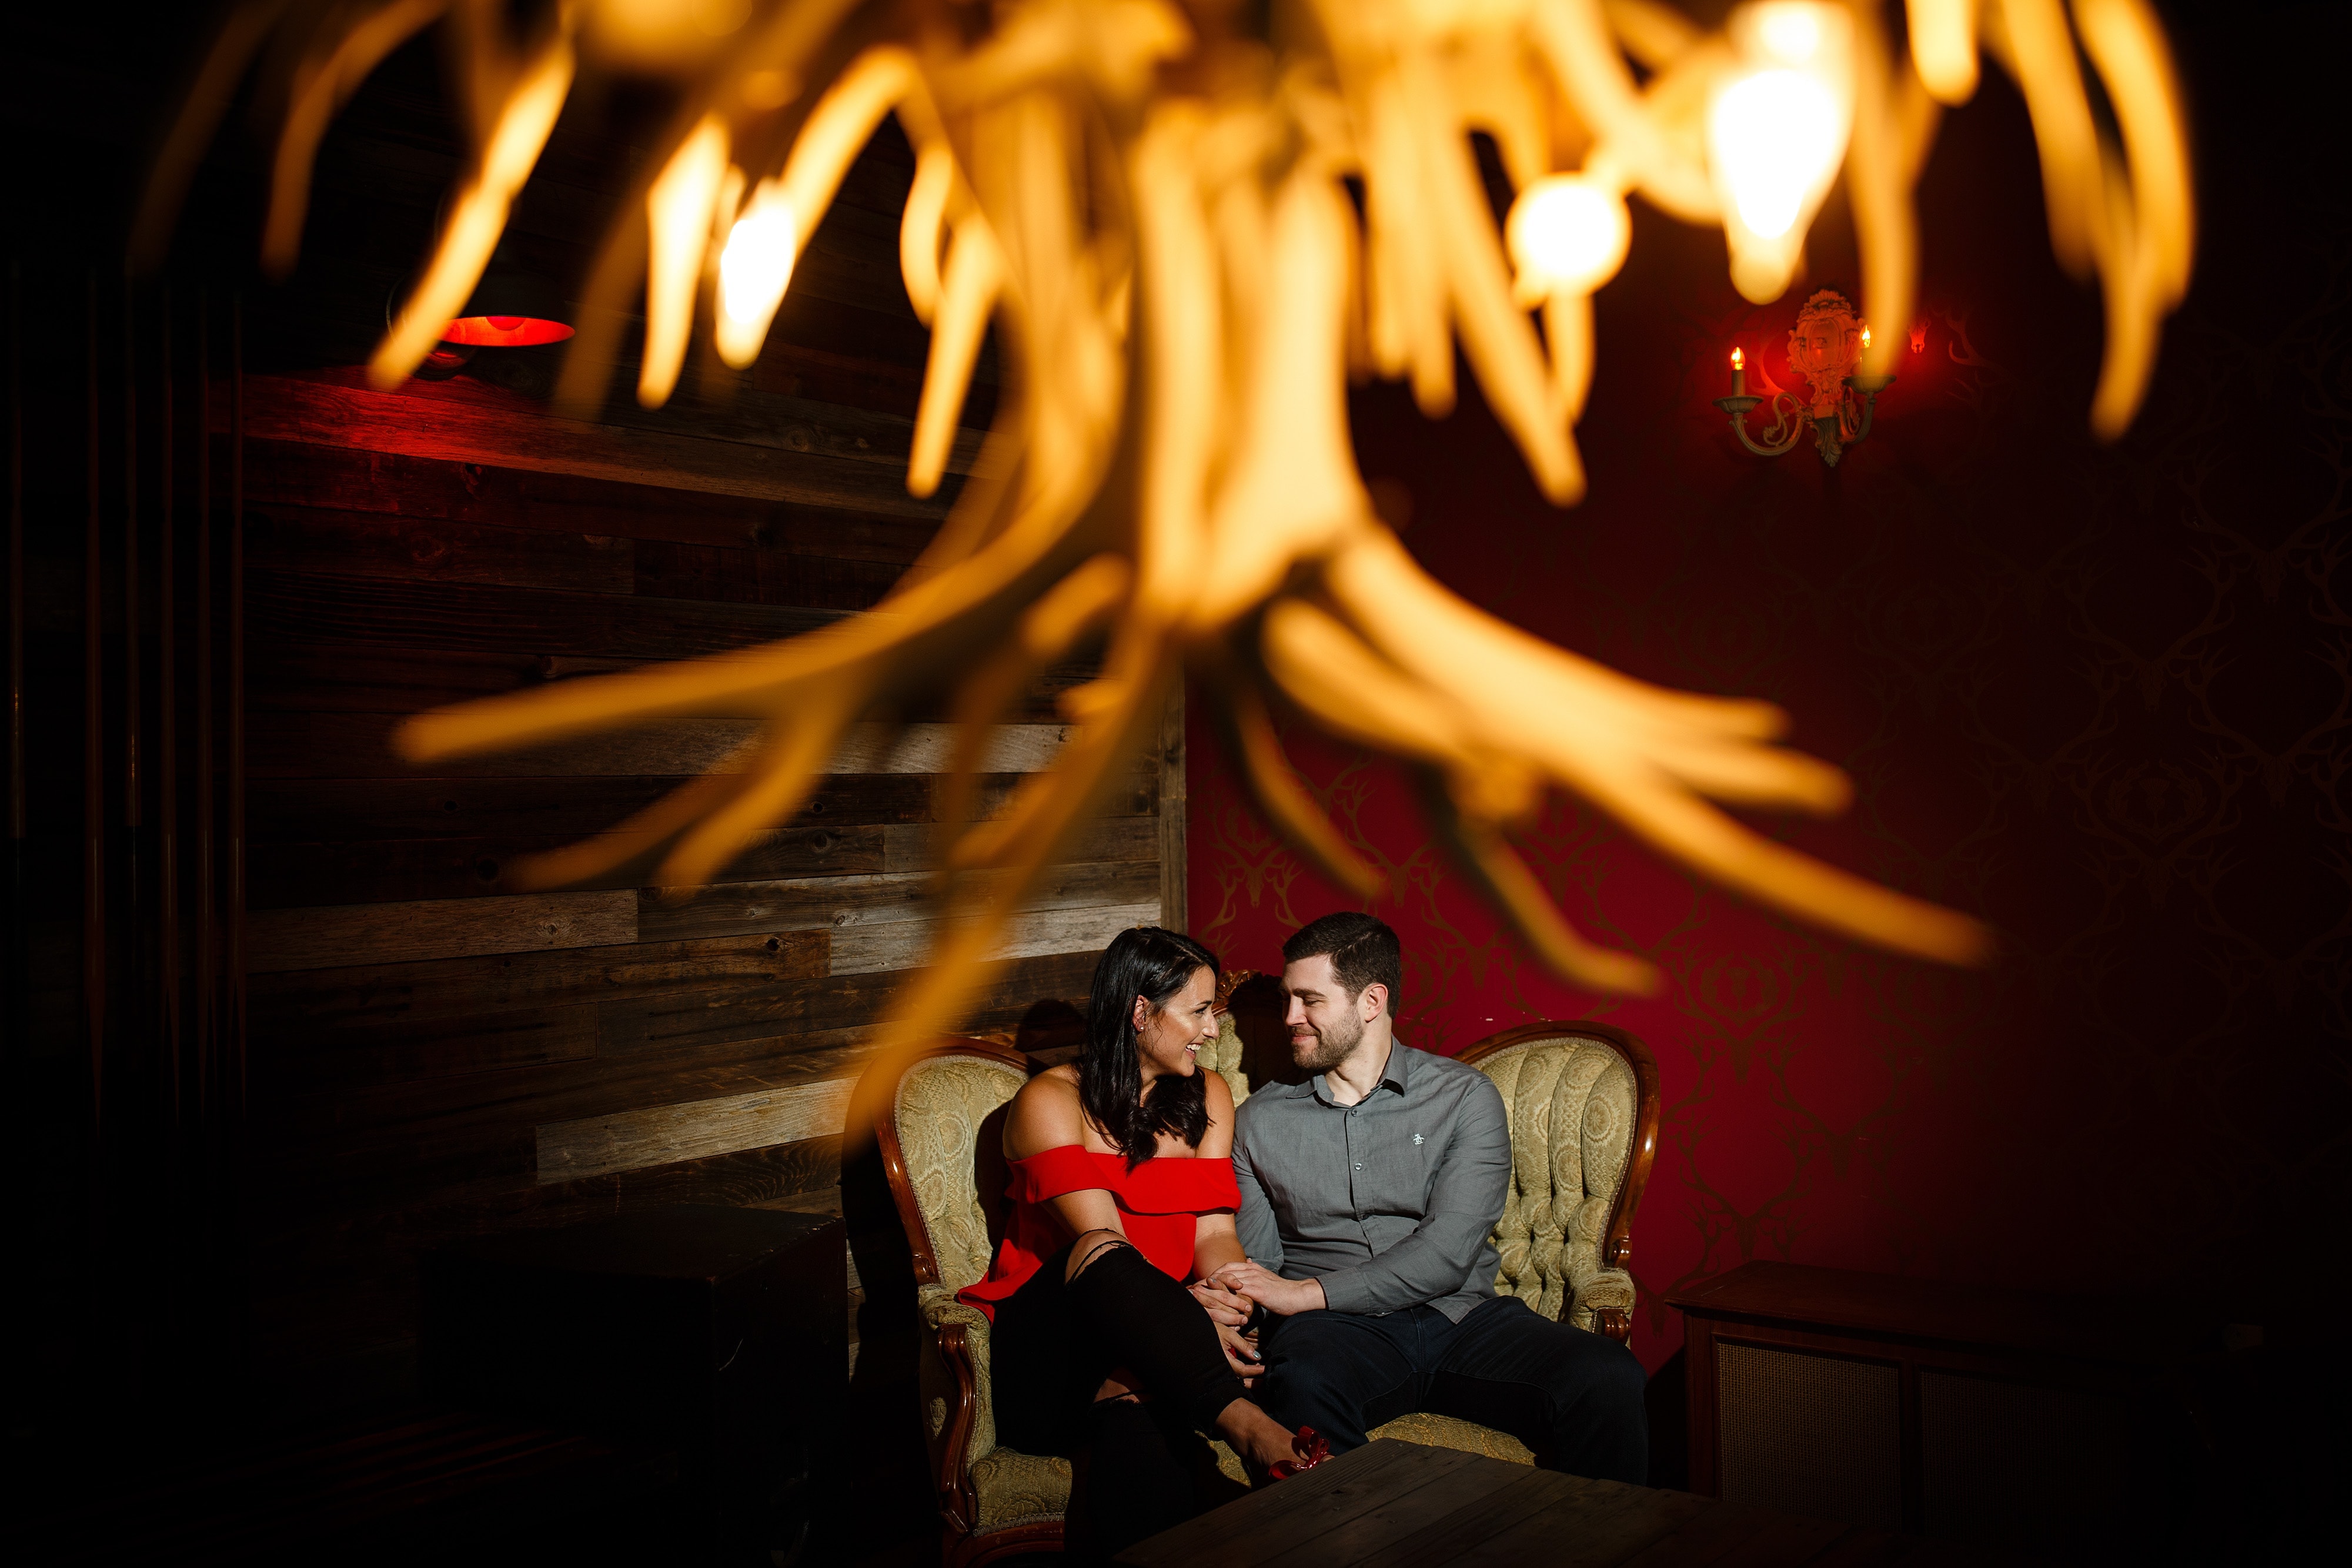 Danielle cuddles on the couch with Jordan while having a drink at The Curtis Club during their engagement session in Denver